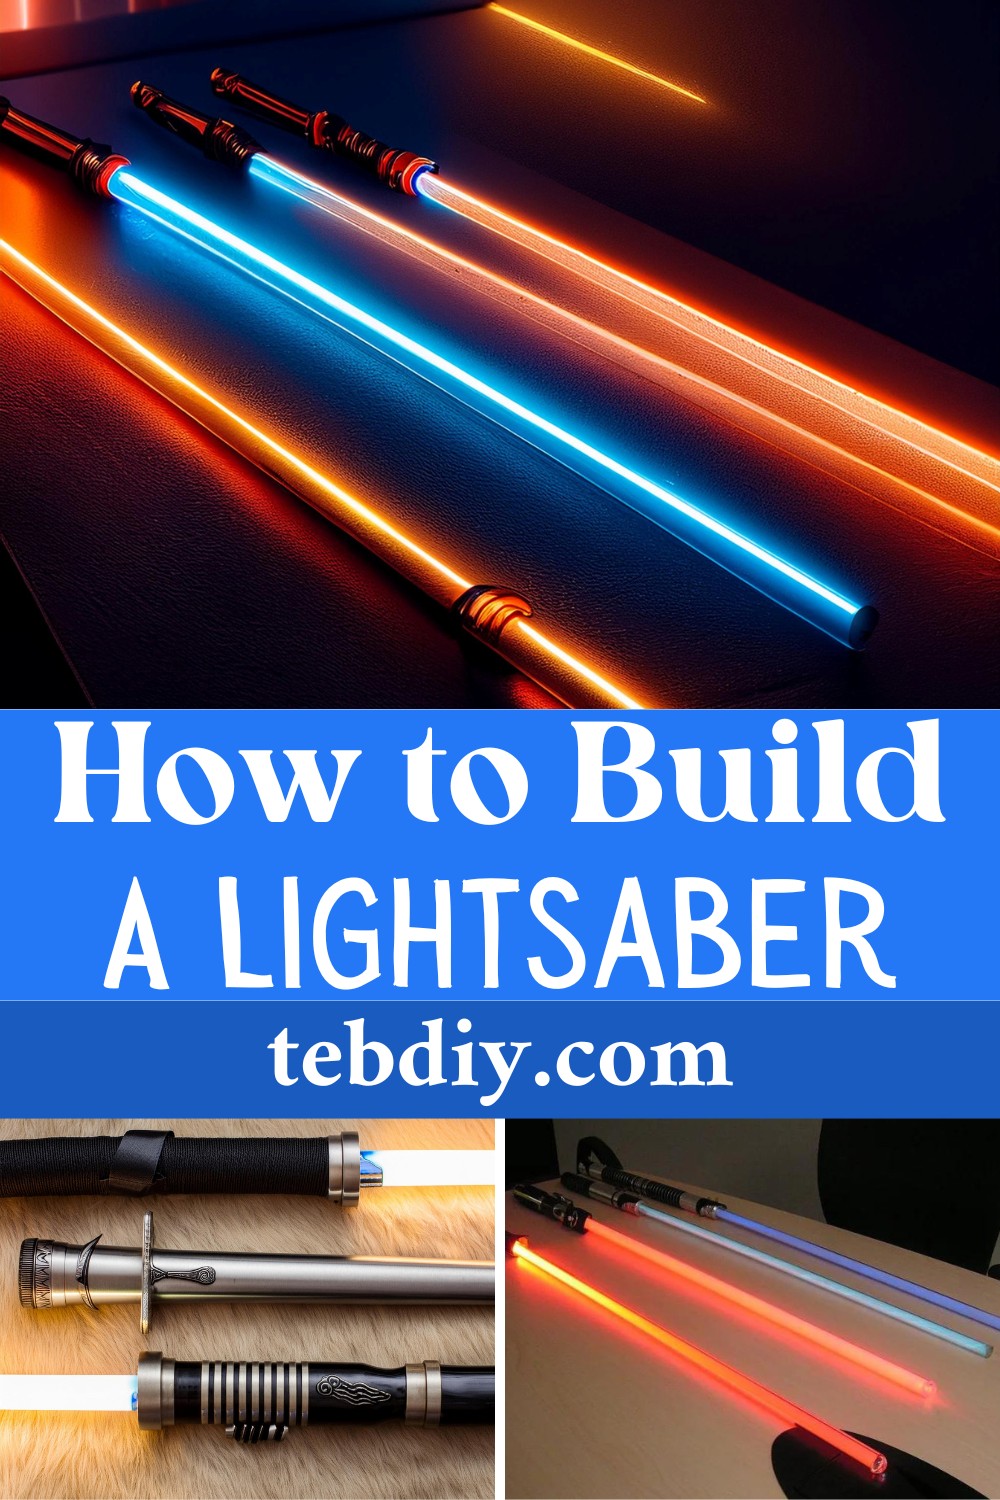 How To Build A Lightsaber